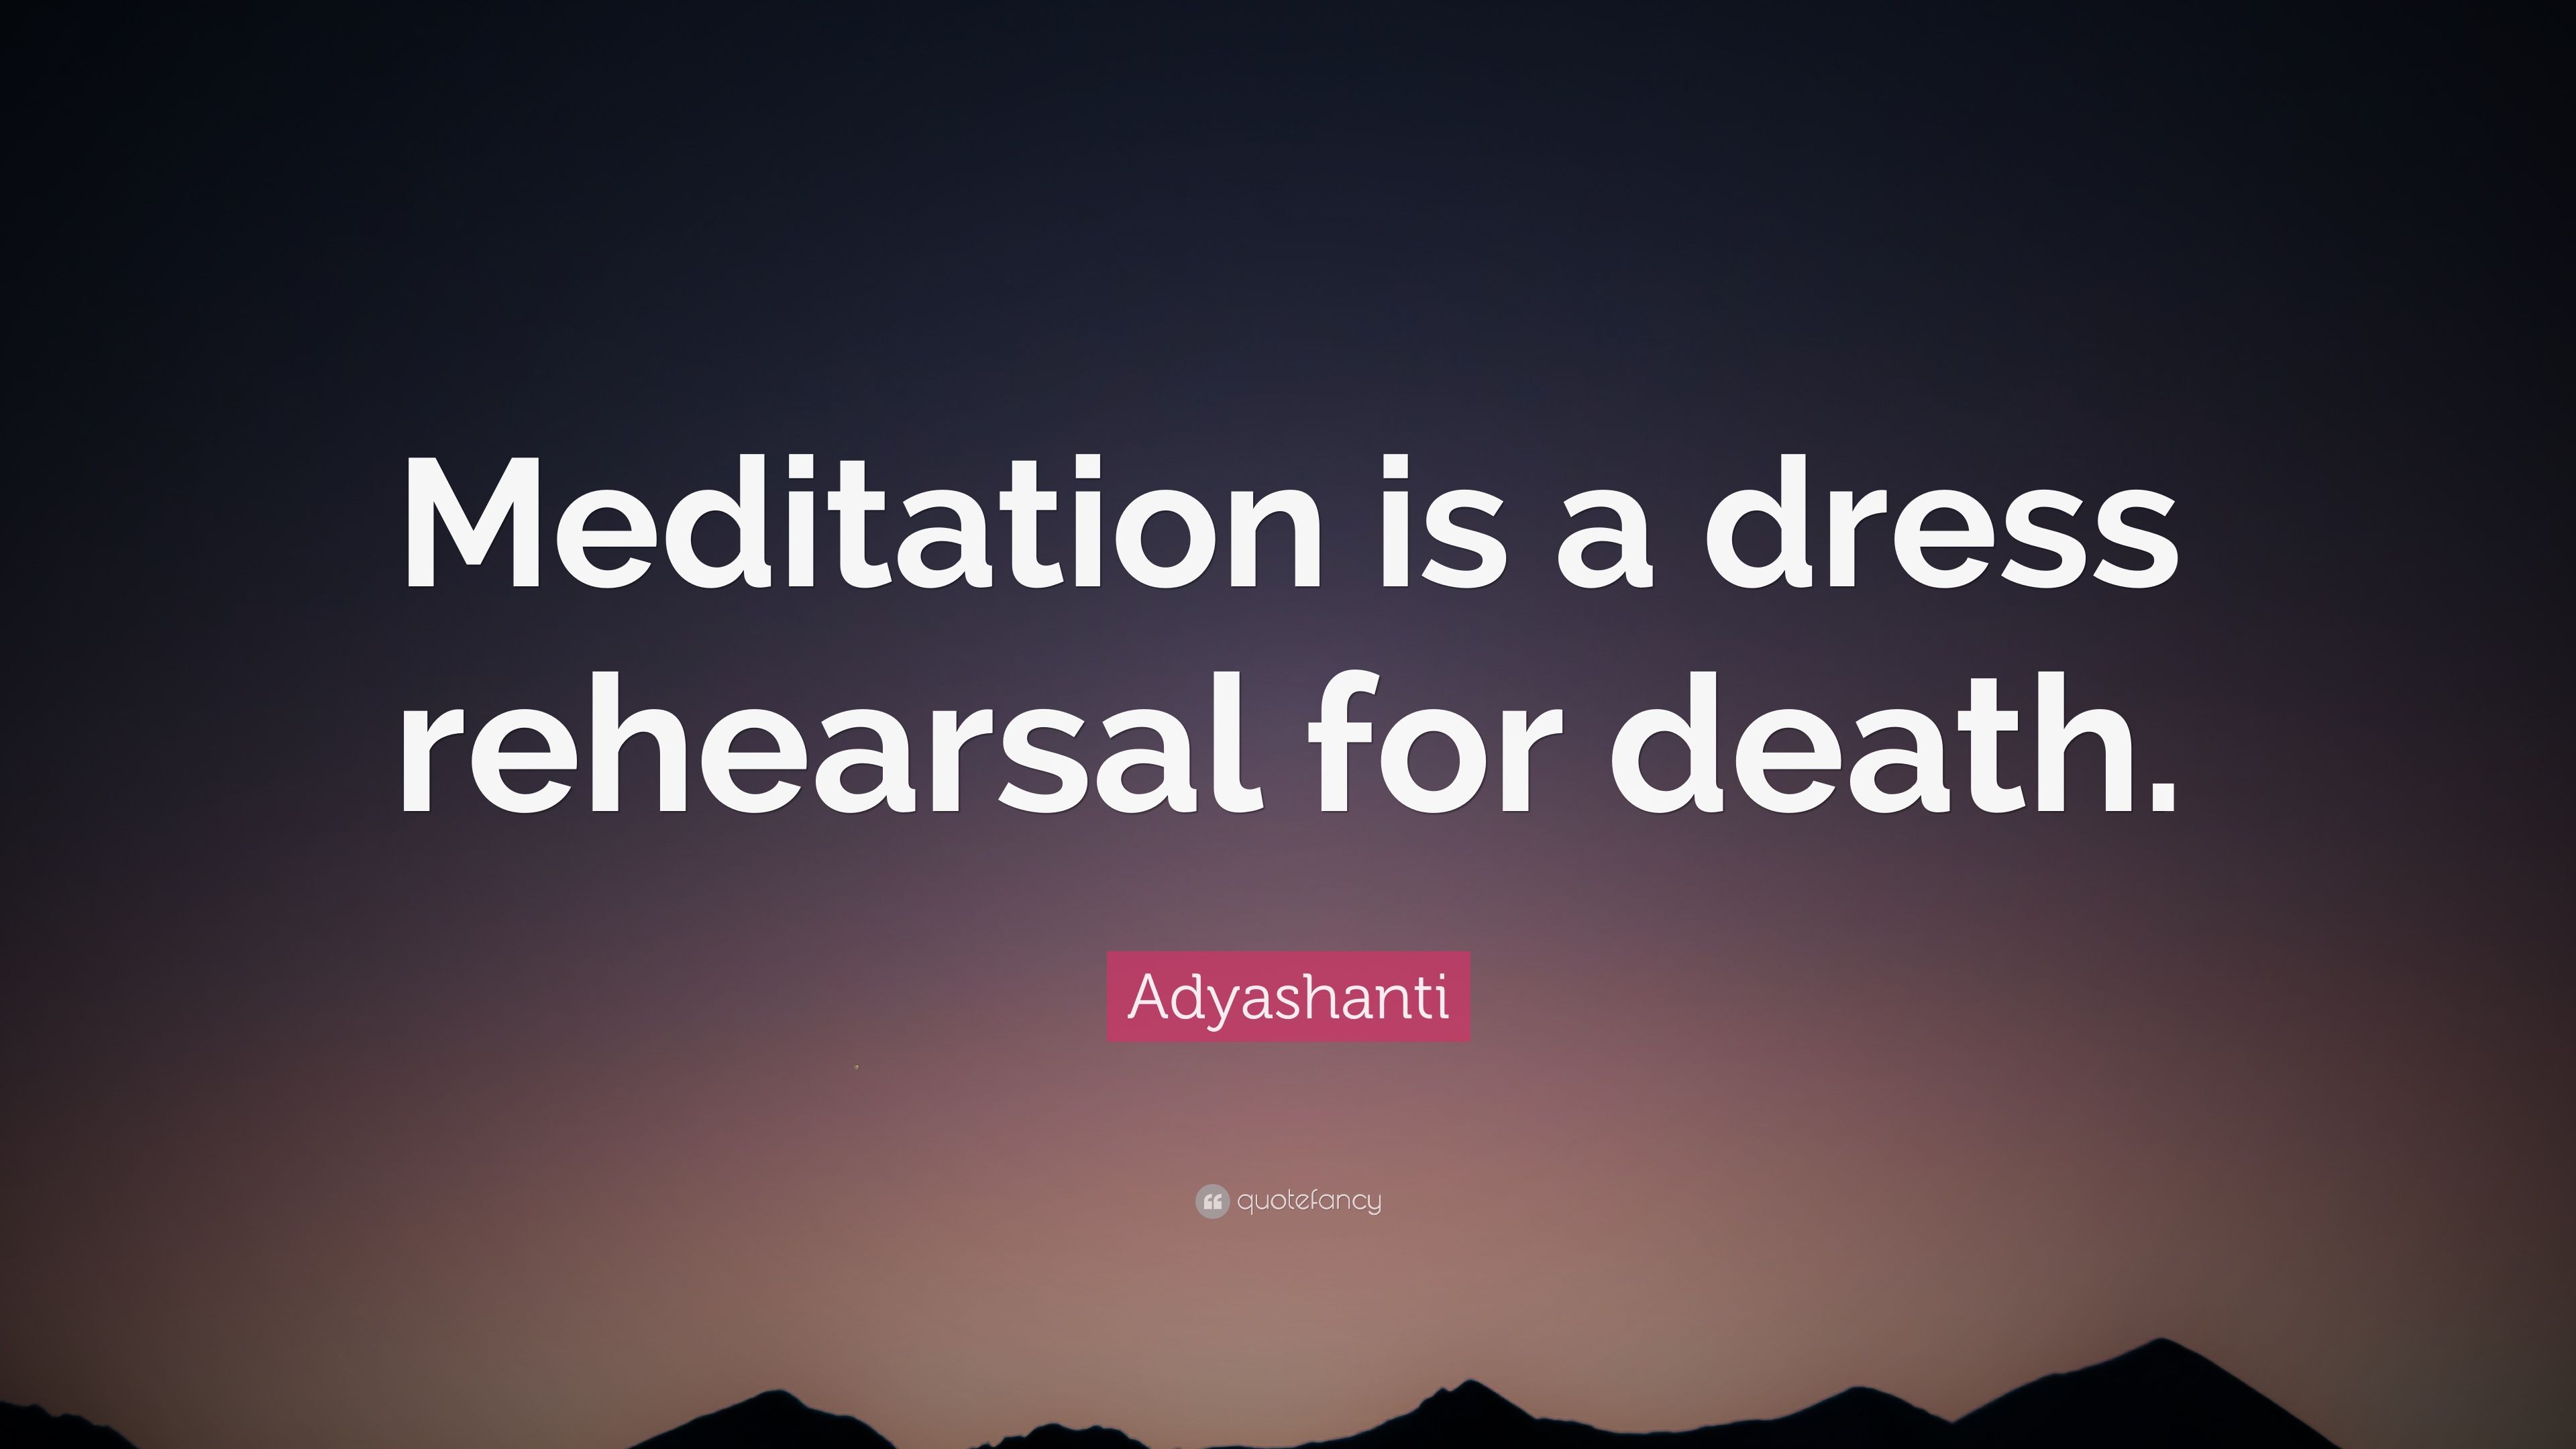 Adyashanti Quote: “Meditation is a dress rehearsal for death.” 12